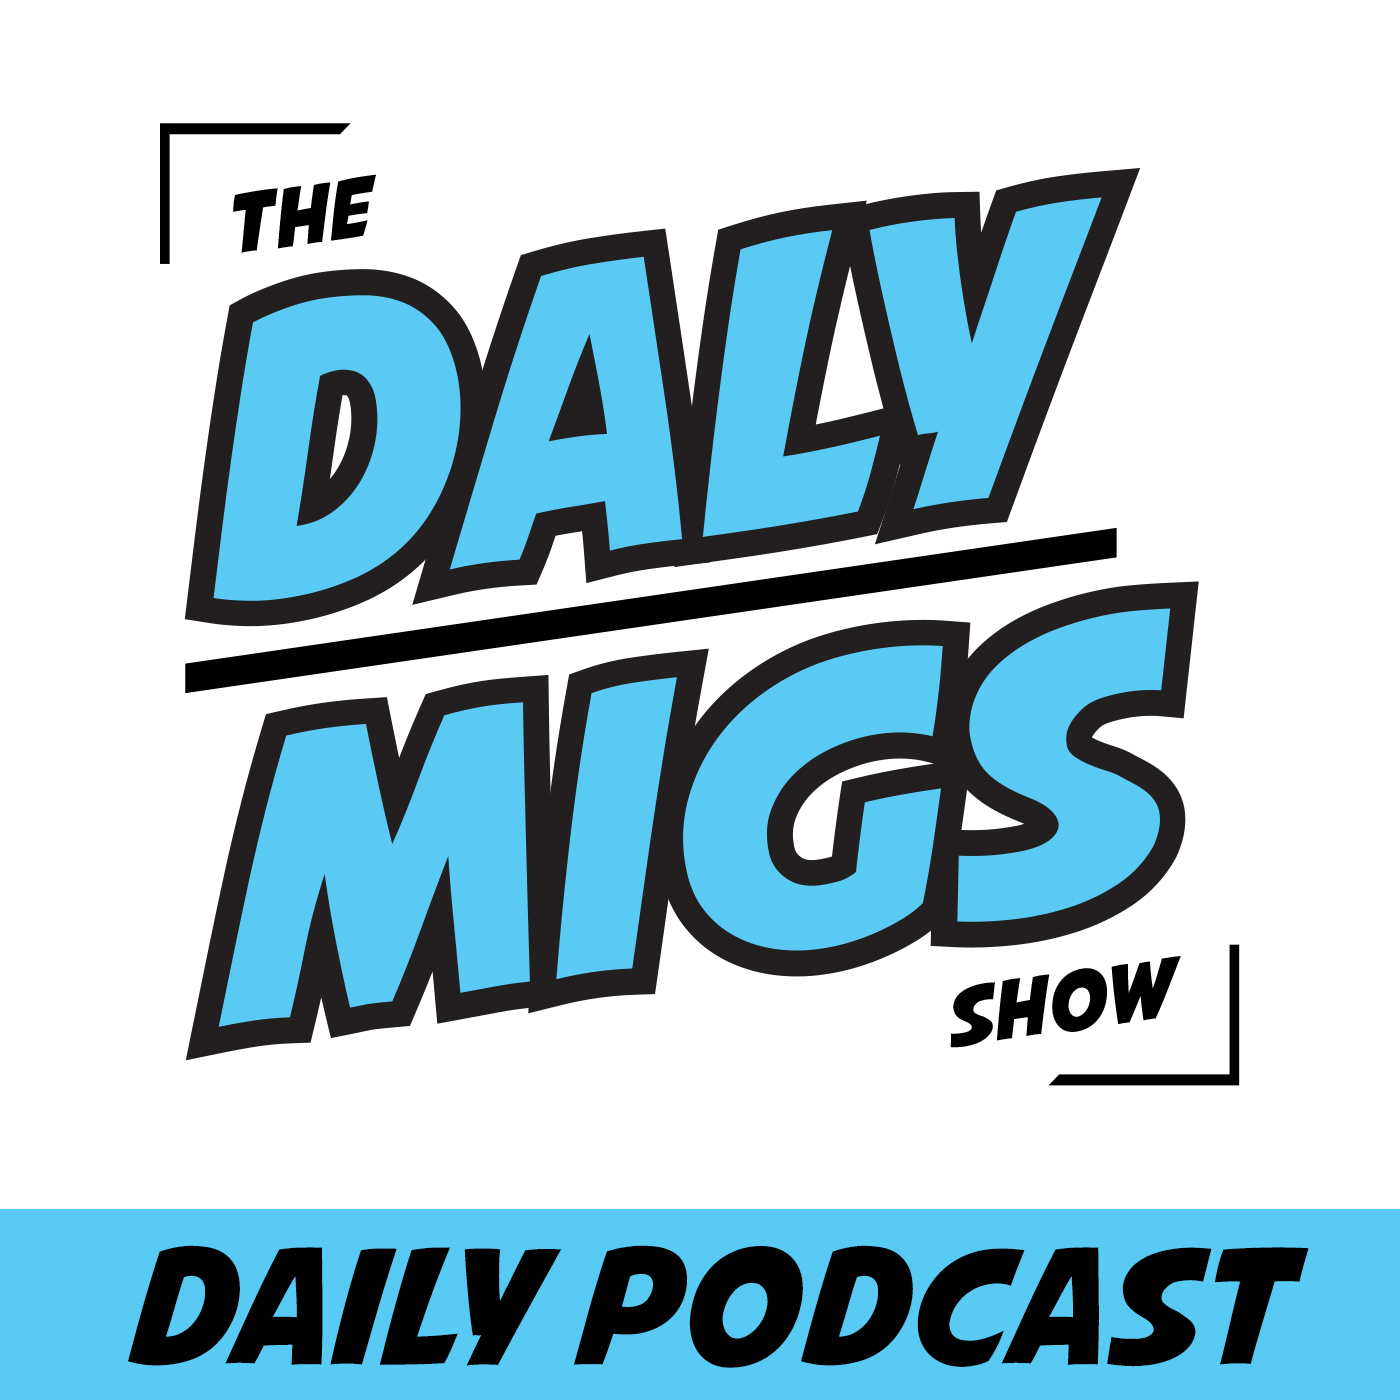 Motley Crue joins The Daly Migs Show!